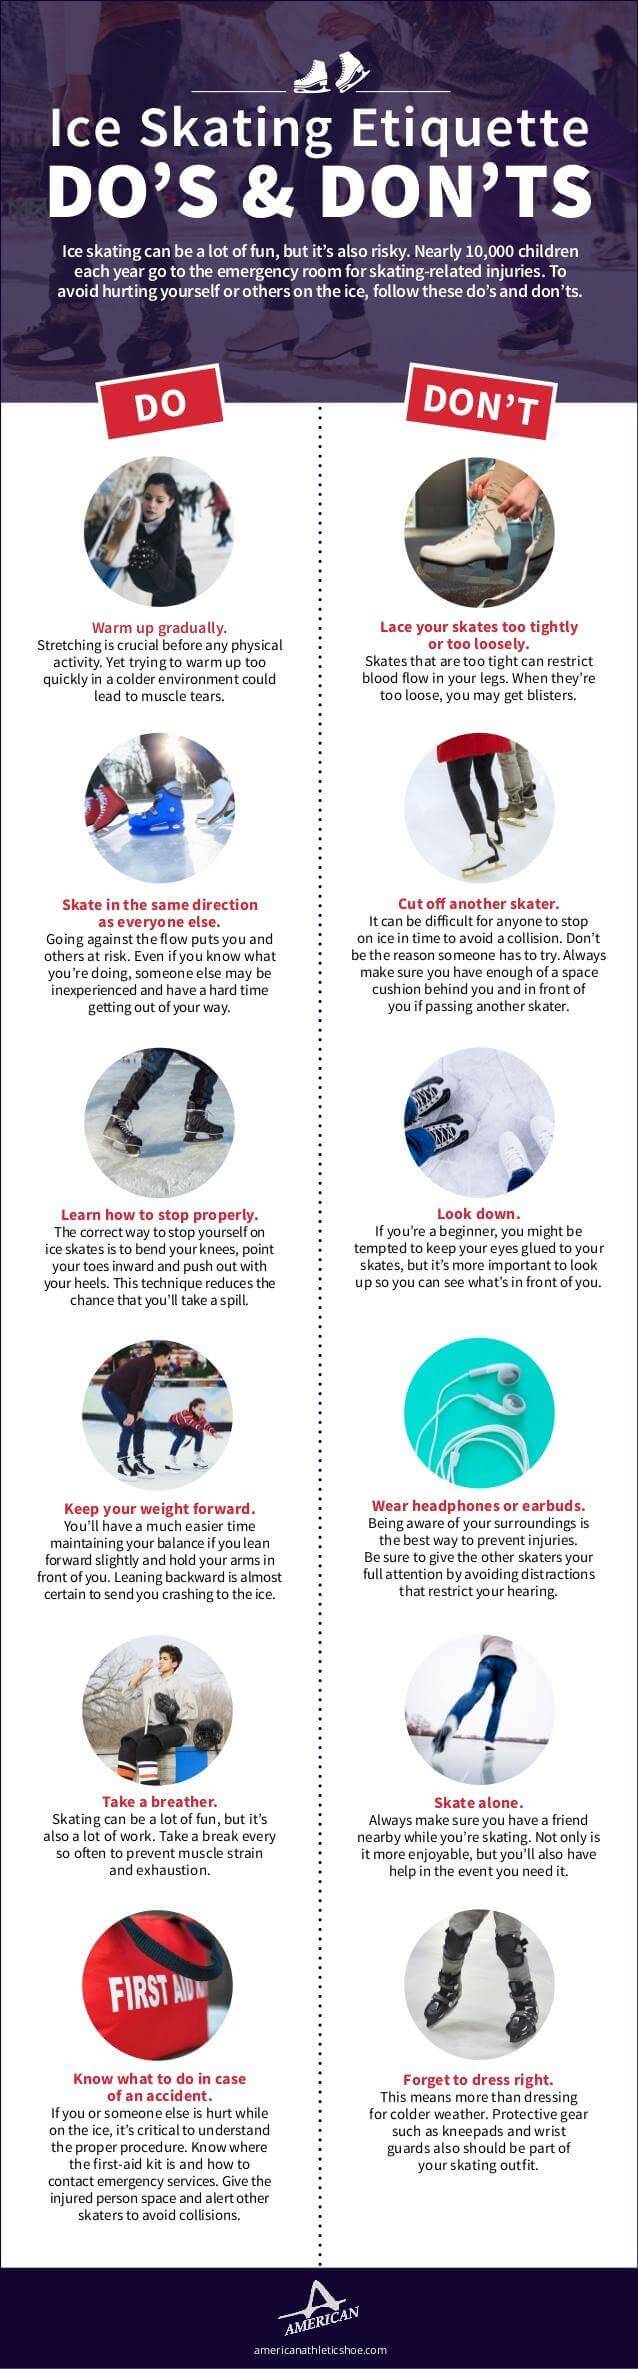 How to Keep Kids Feet and Ankles Safe When Ice Skating